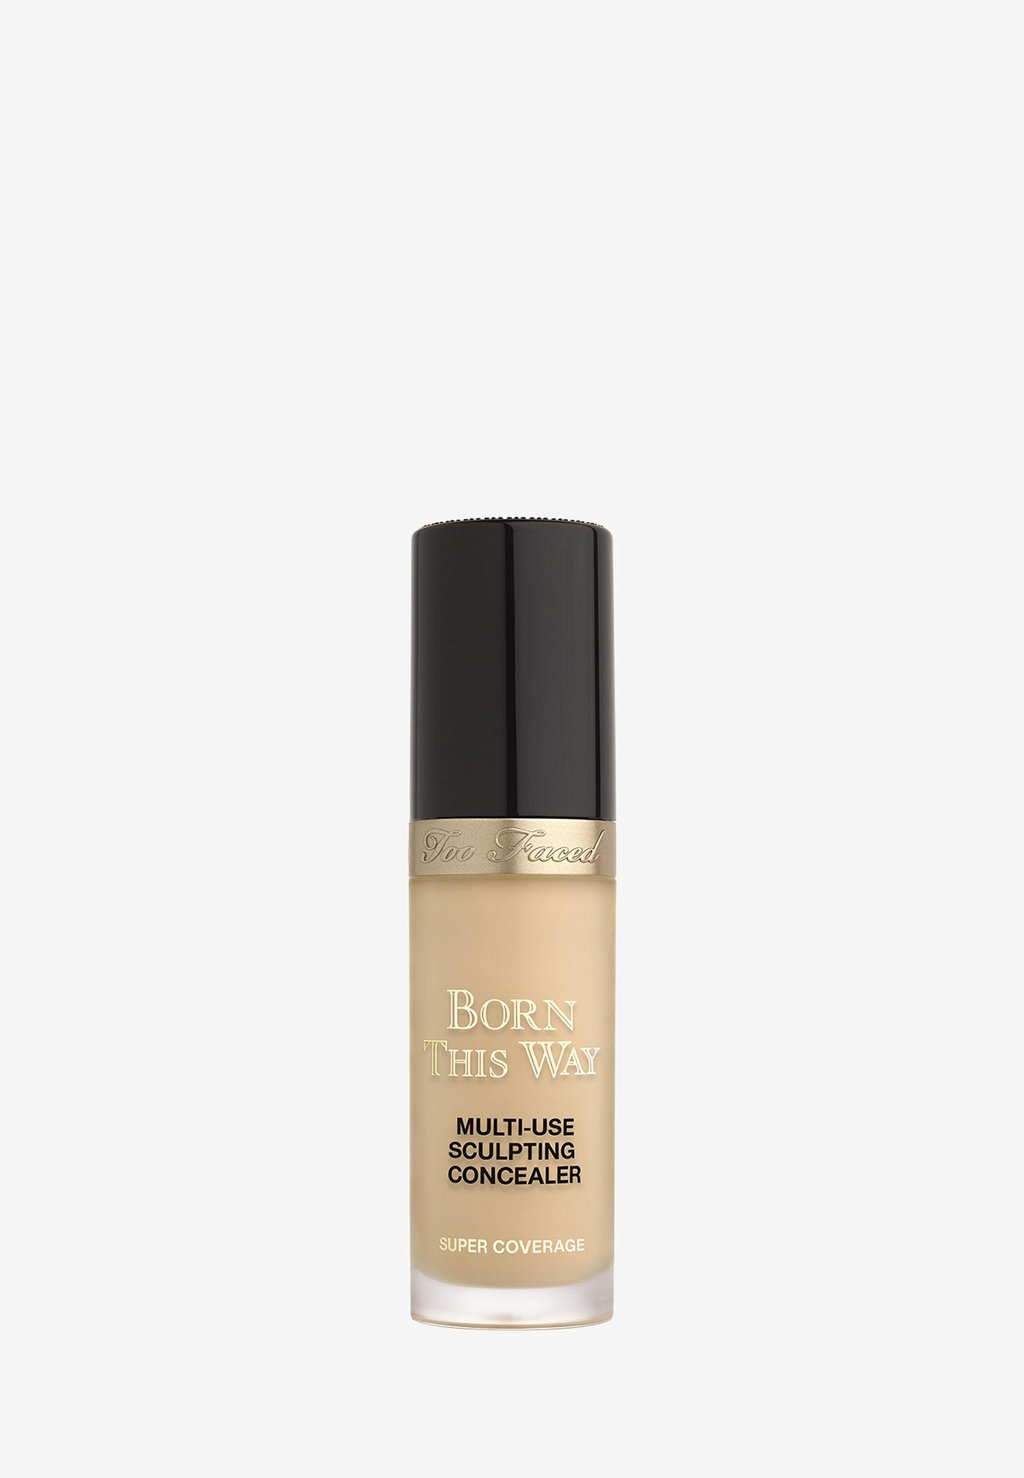 Консилер BORN THIS WAY SUPER COVERAGE CONCEALER Too Faced, цвет golden beige